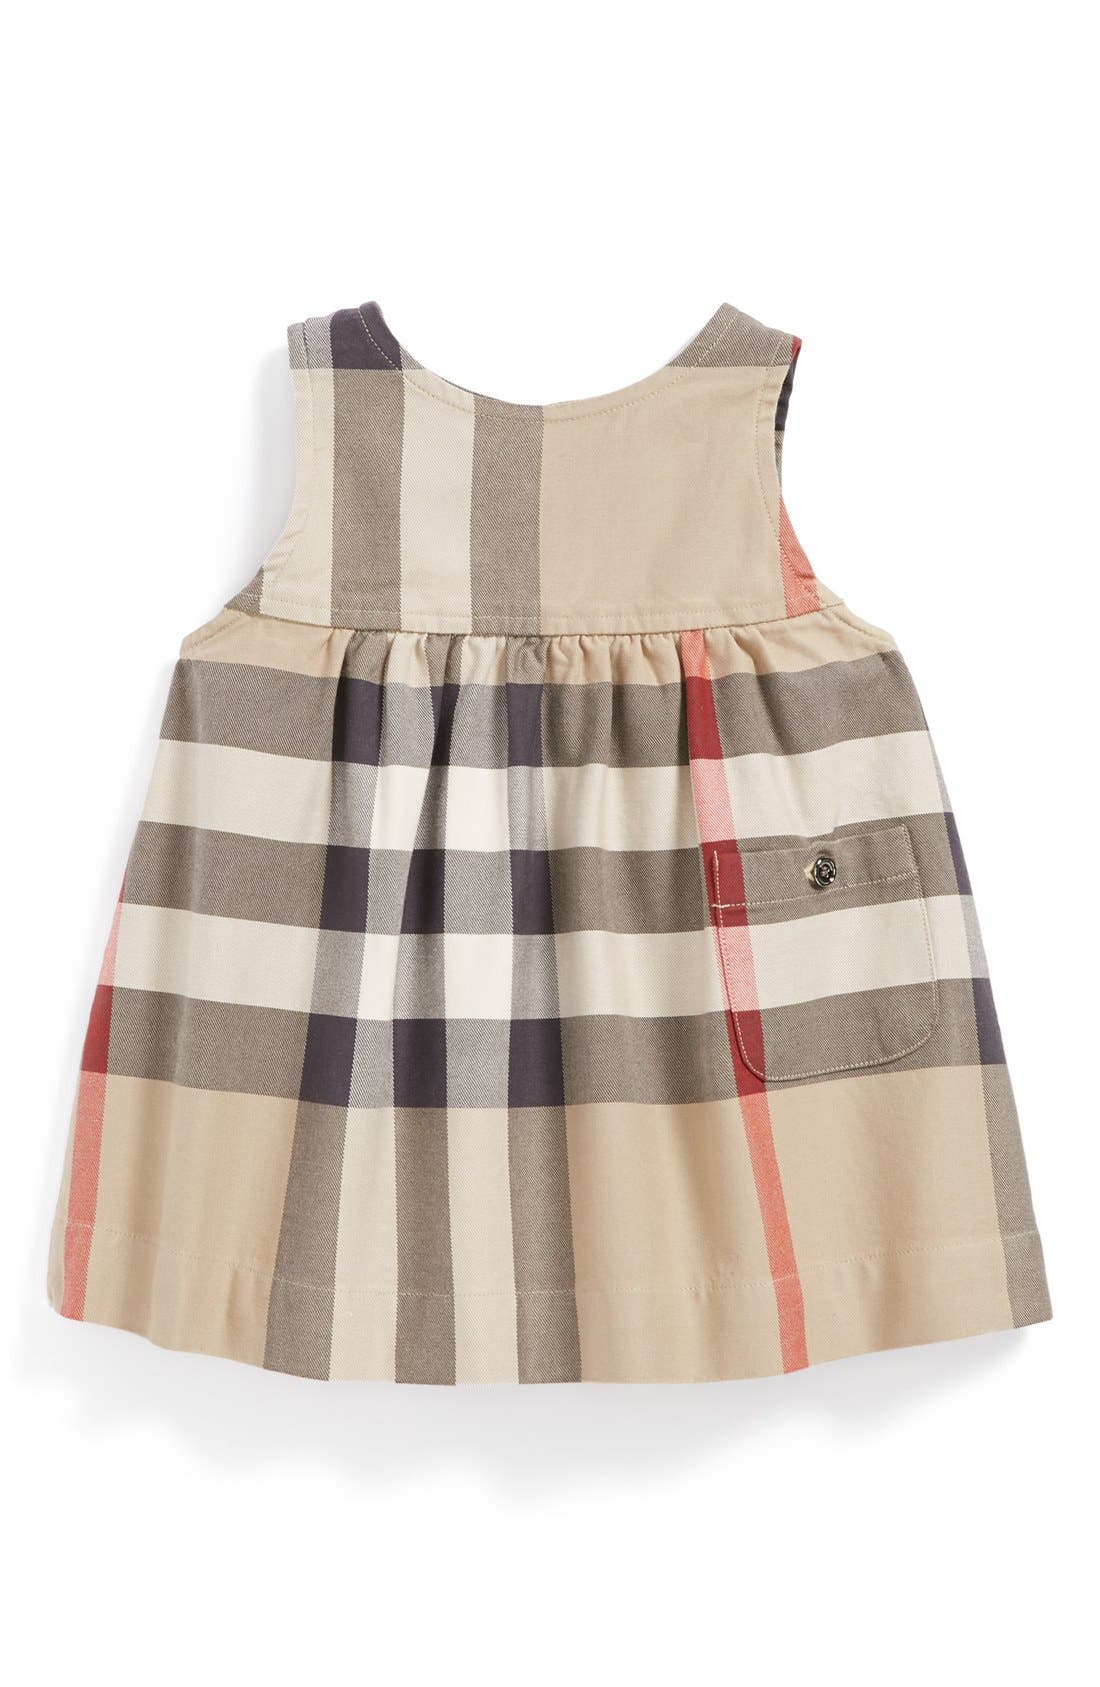 Burberry Baby Boy Clothes Outlet | IUCN 